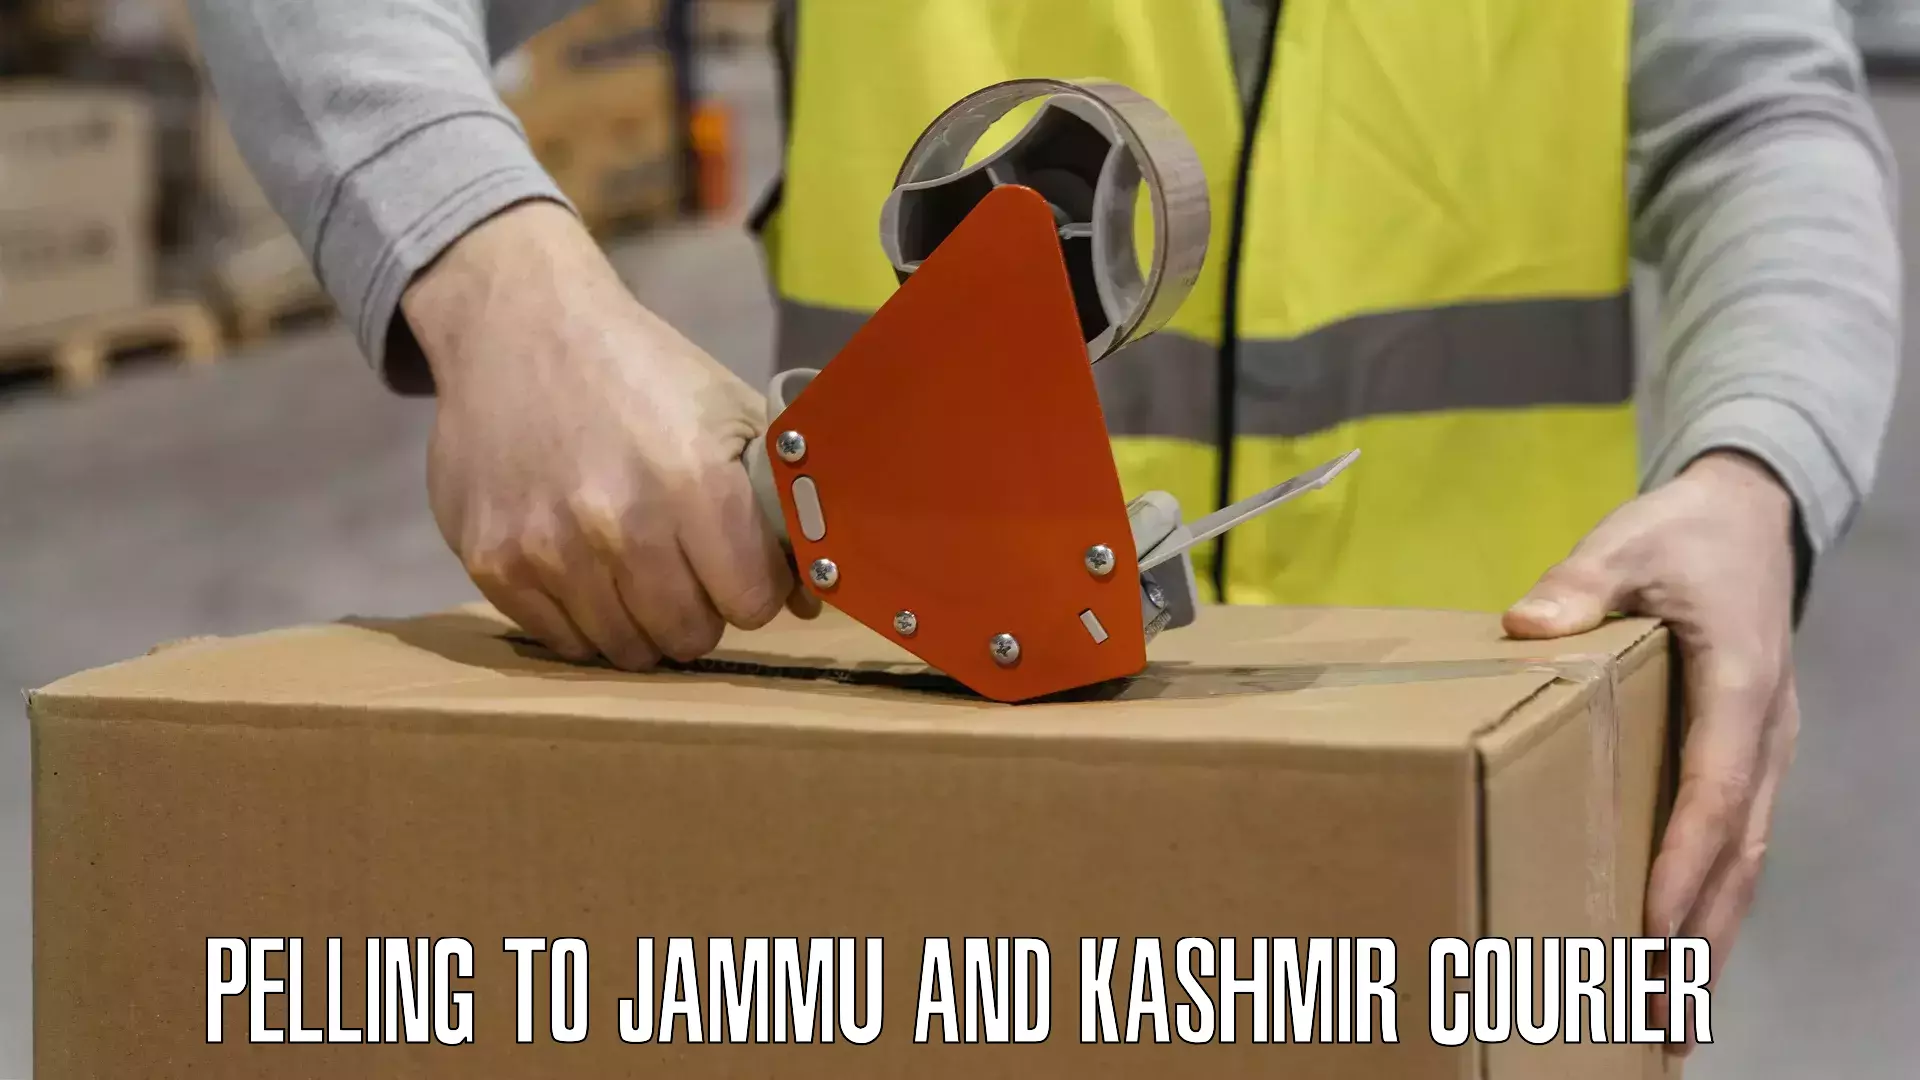 On-call courier service Pelling to Jammu and Kashmir